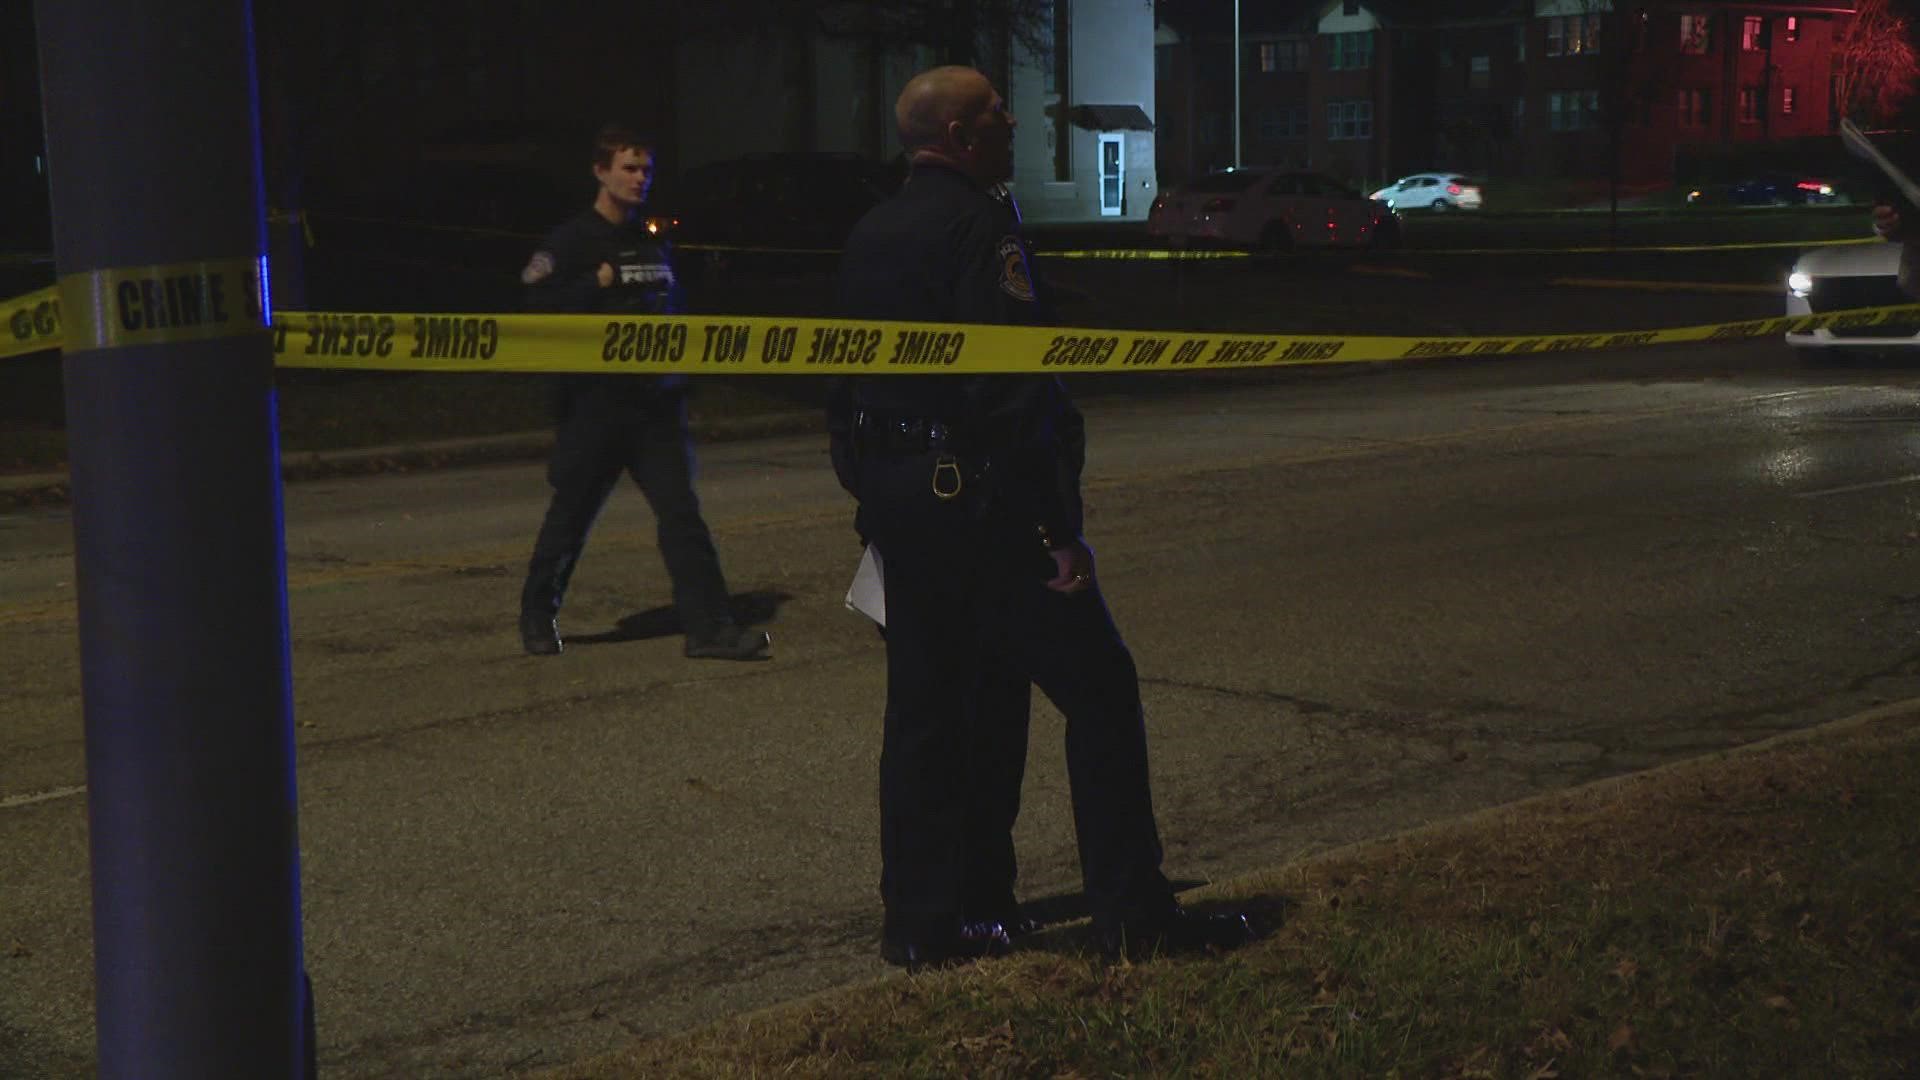 Officers were called to investigate a shooting in the 3700 block of Washington Boulevard on Indy's near north side shortly after 7:45 p.m. Friday.